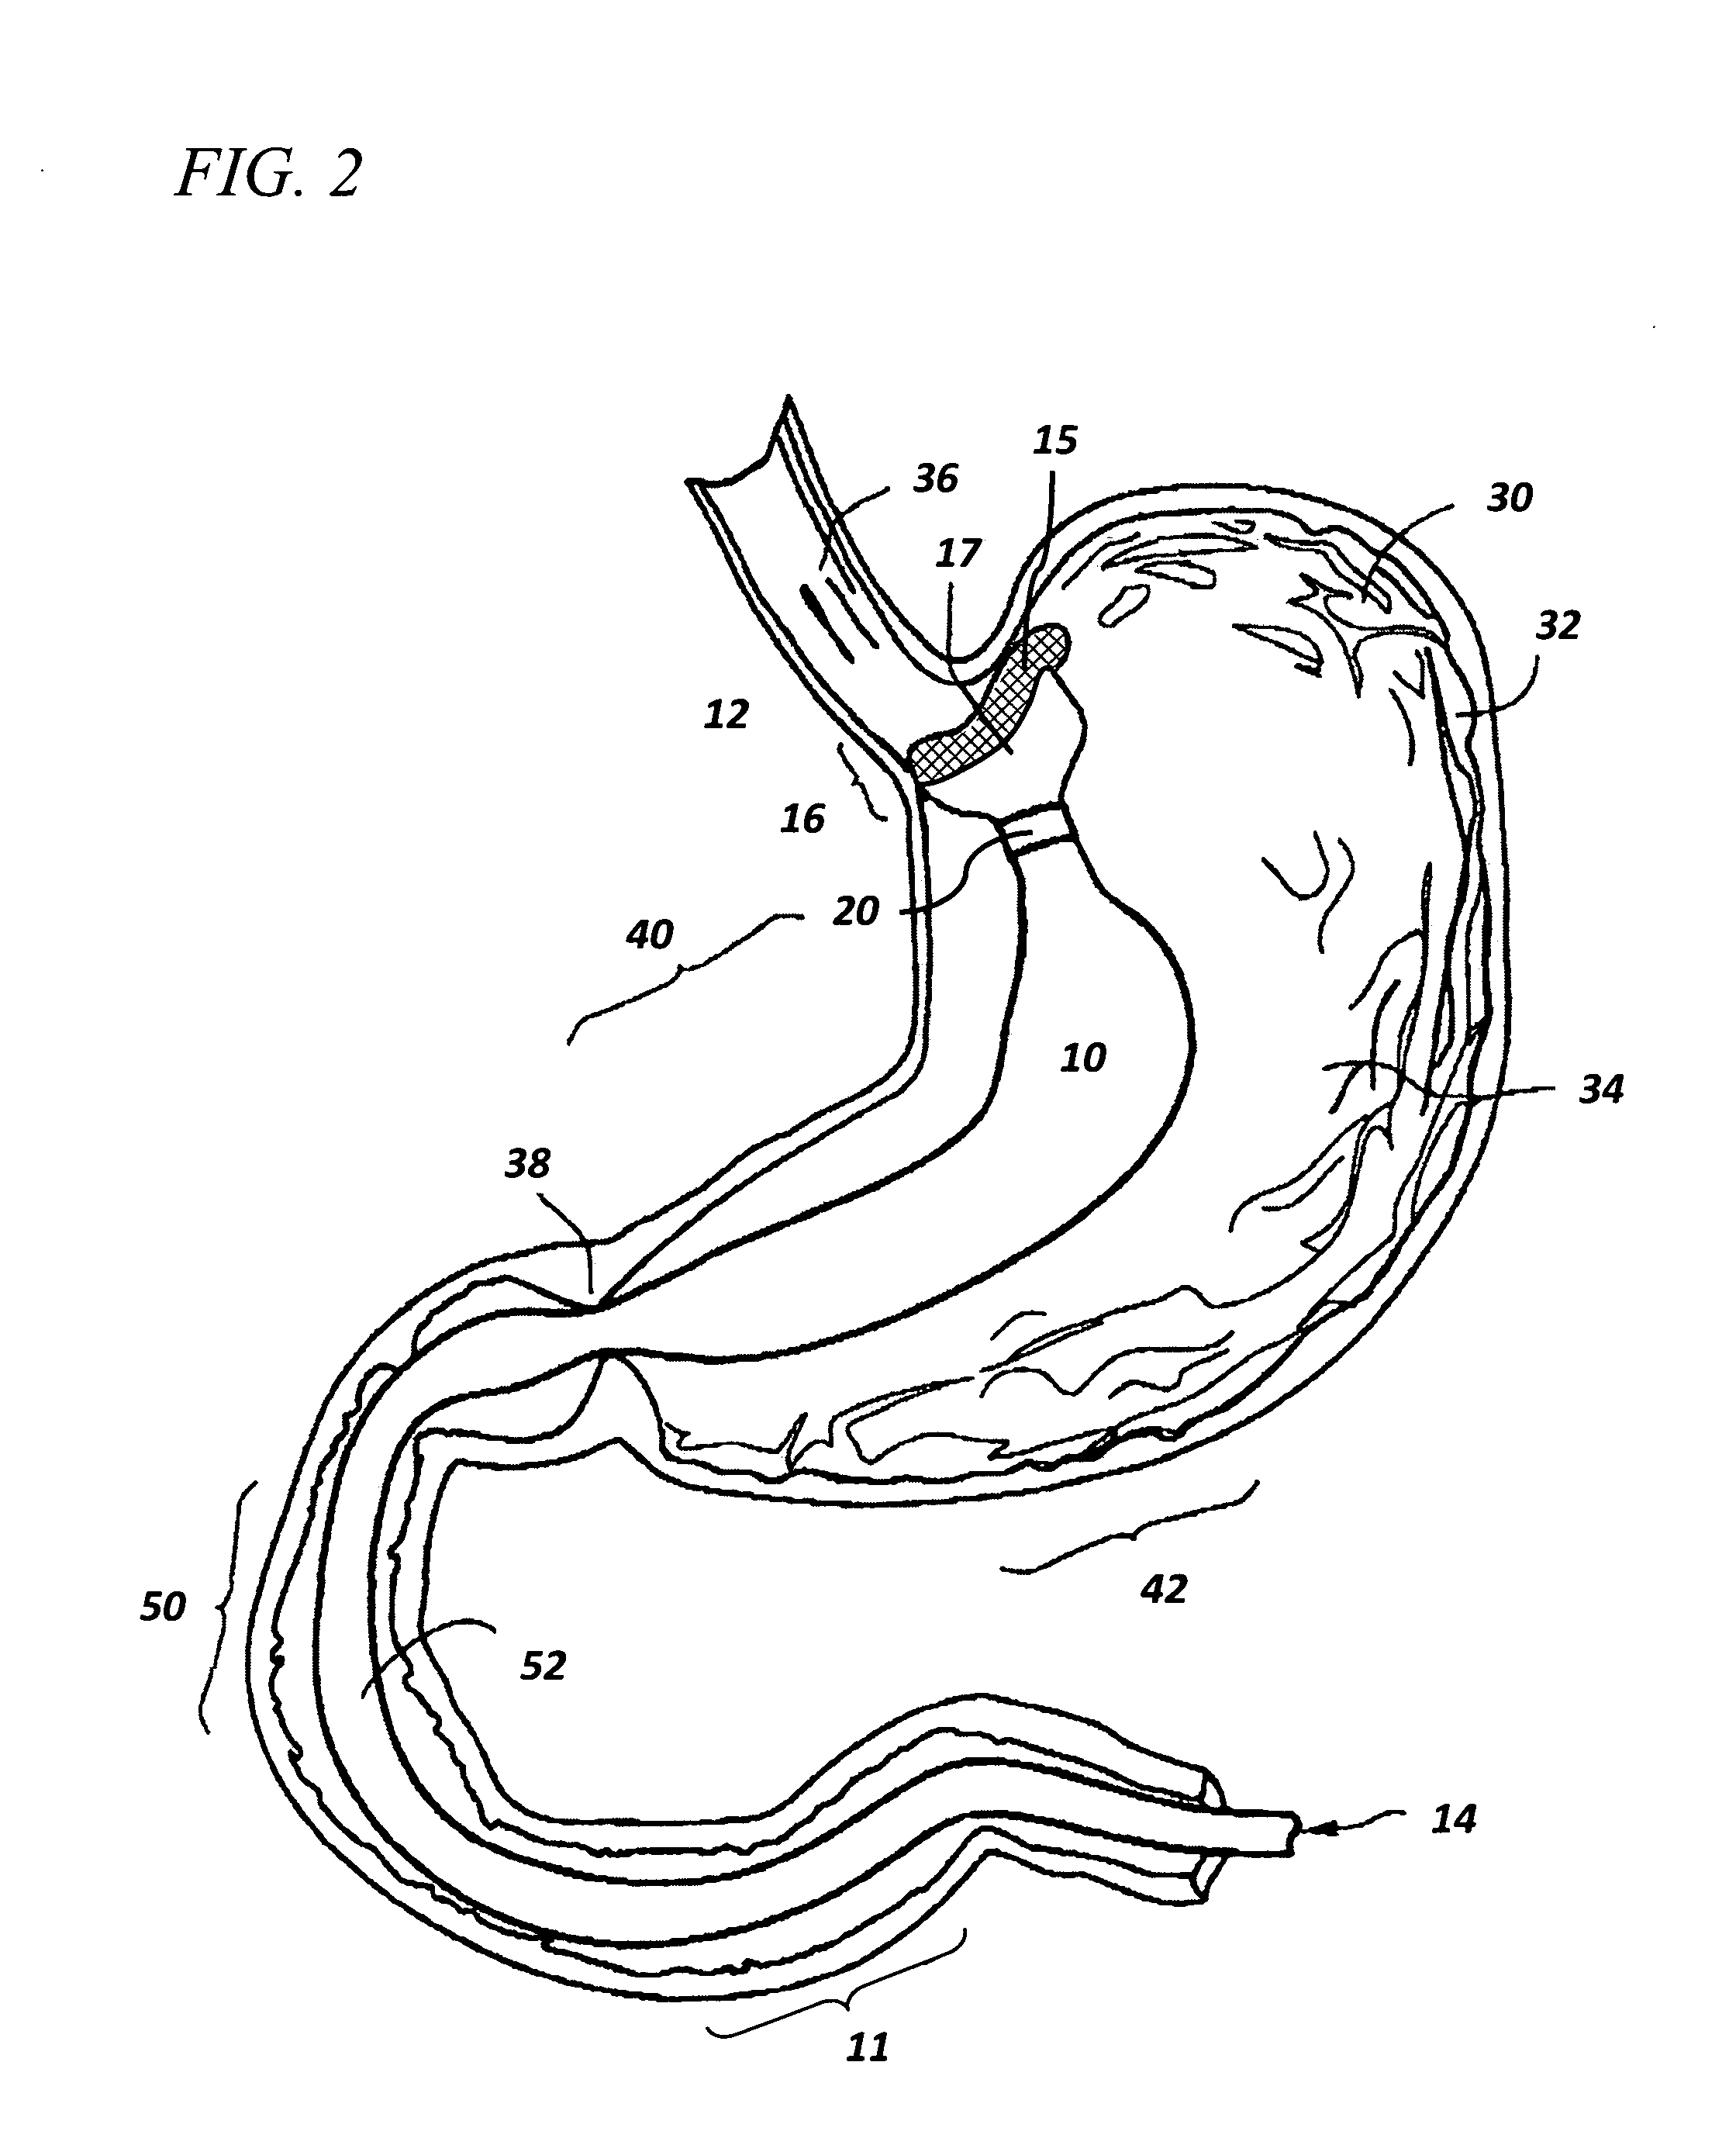 Devices and methods for endolumenal therapy